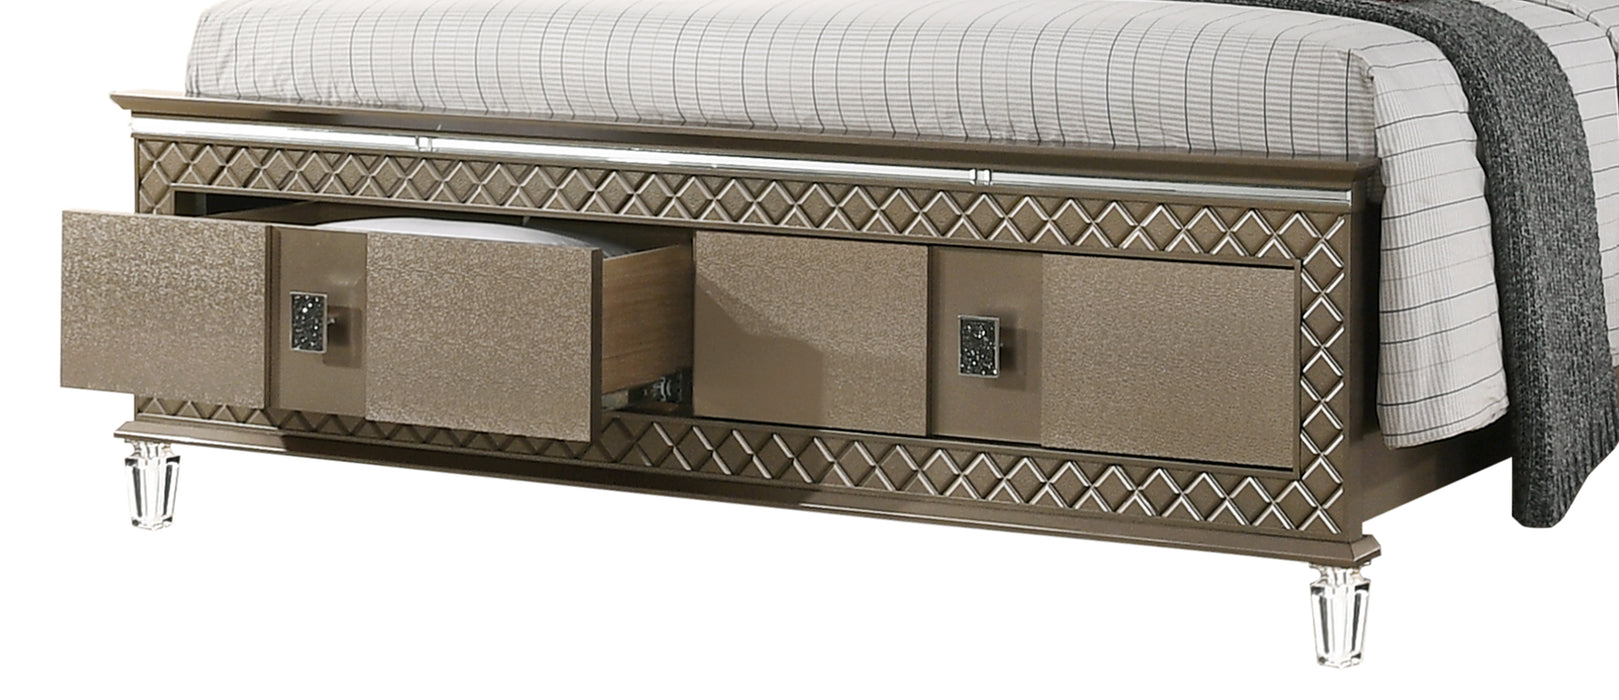 Coral Contemporary Style Queen Bed in Bronze finish Wood